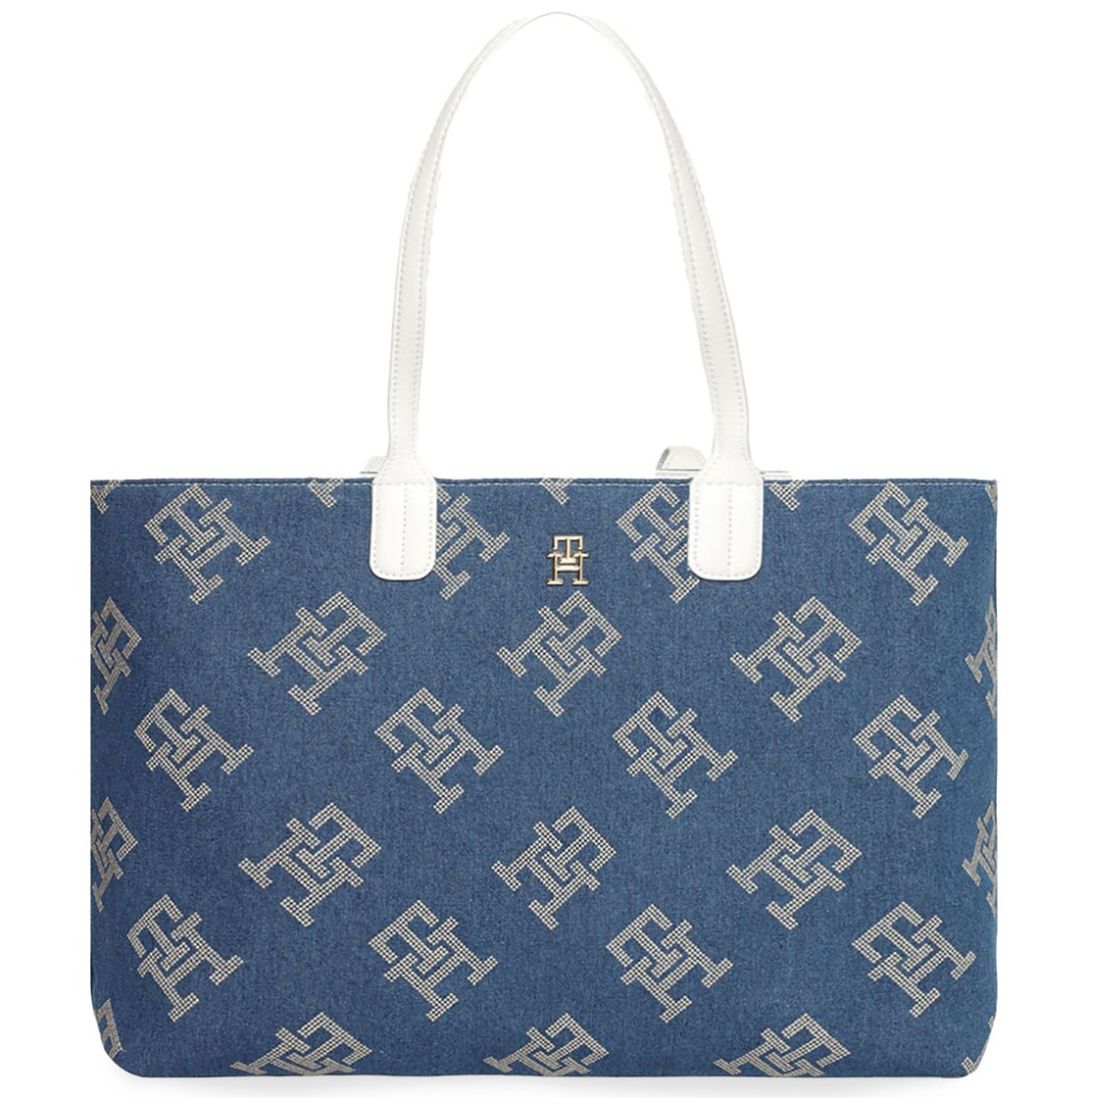 Tote Tommy Hilfiger Color Azul